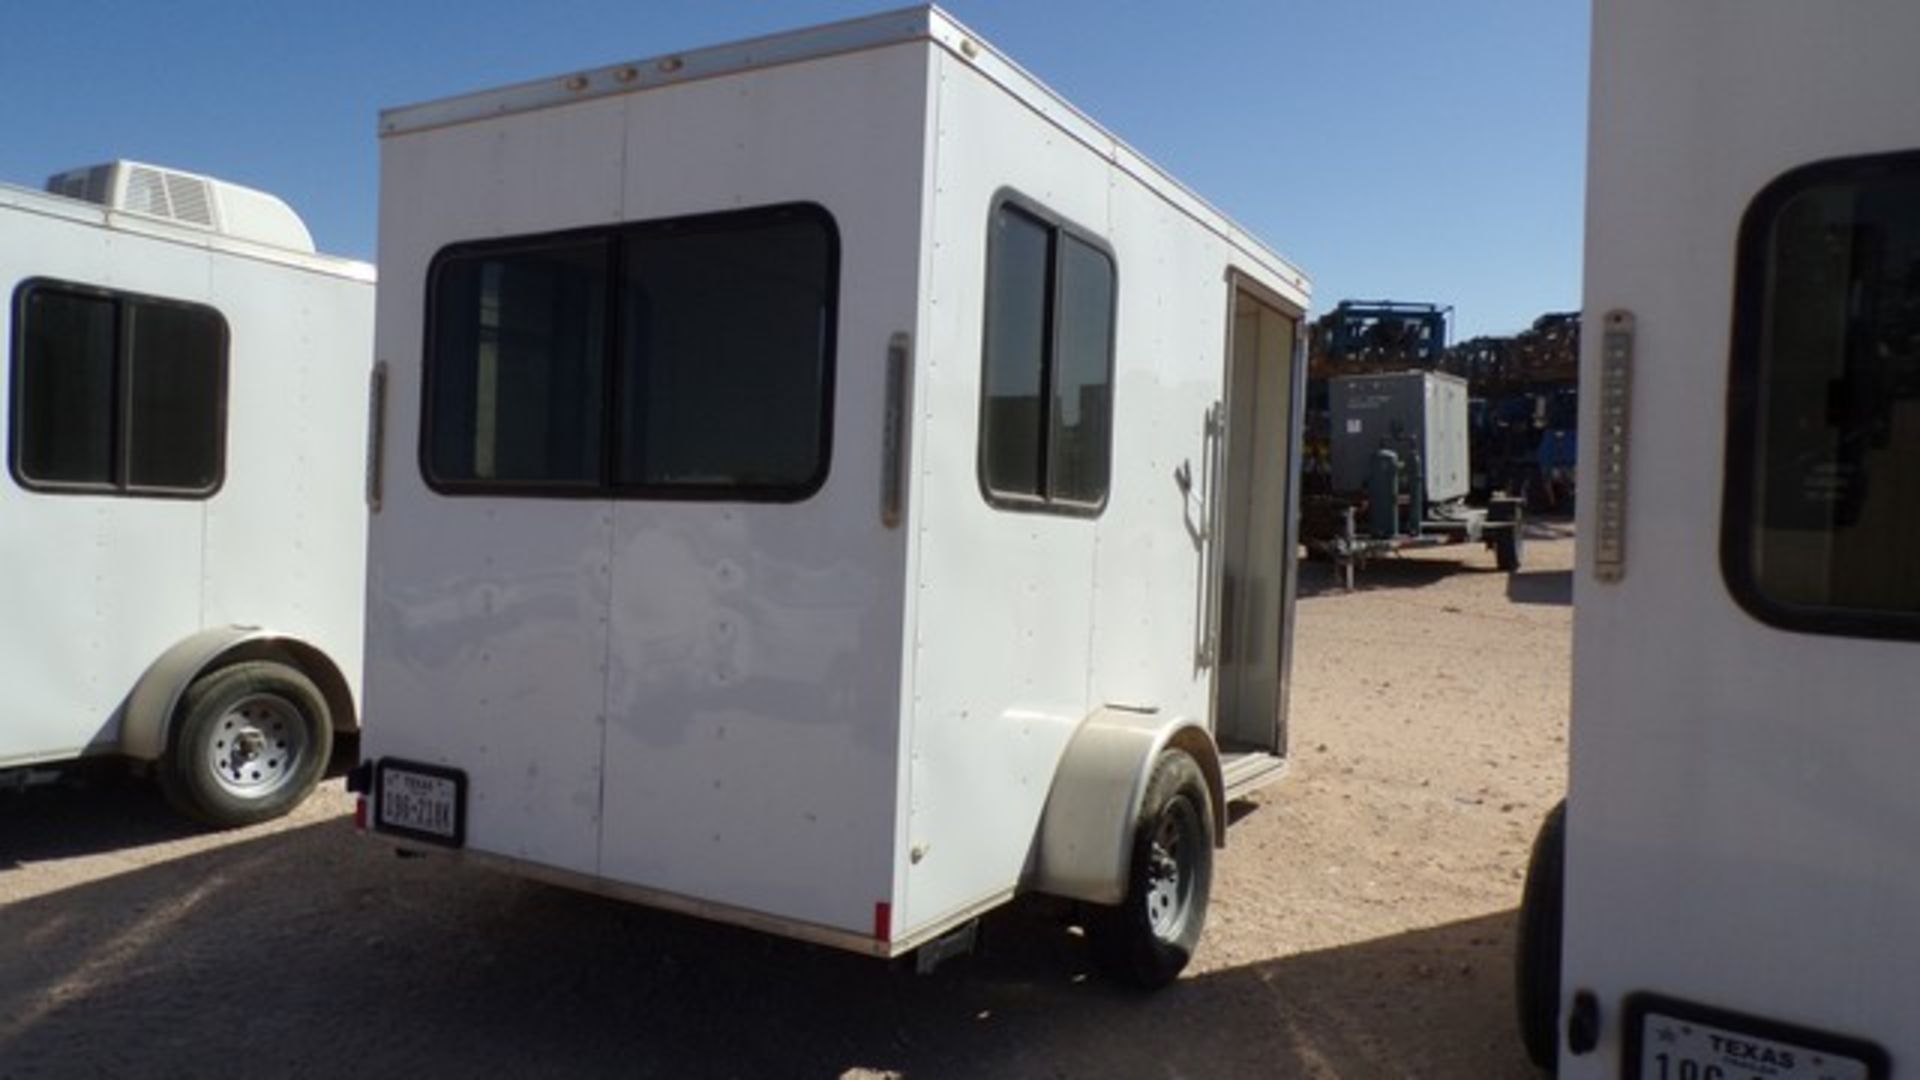 Located in YARD 1 - Midland, TX (2315) (X) 2018 ROCK SOLID CARGO S/A BP 6X10-3500# PORTABLE OFFICE - Image 4 of 6